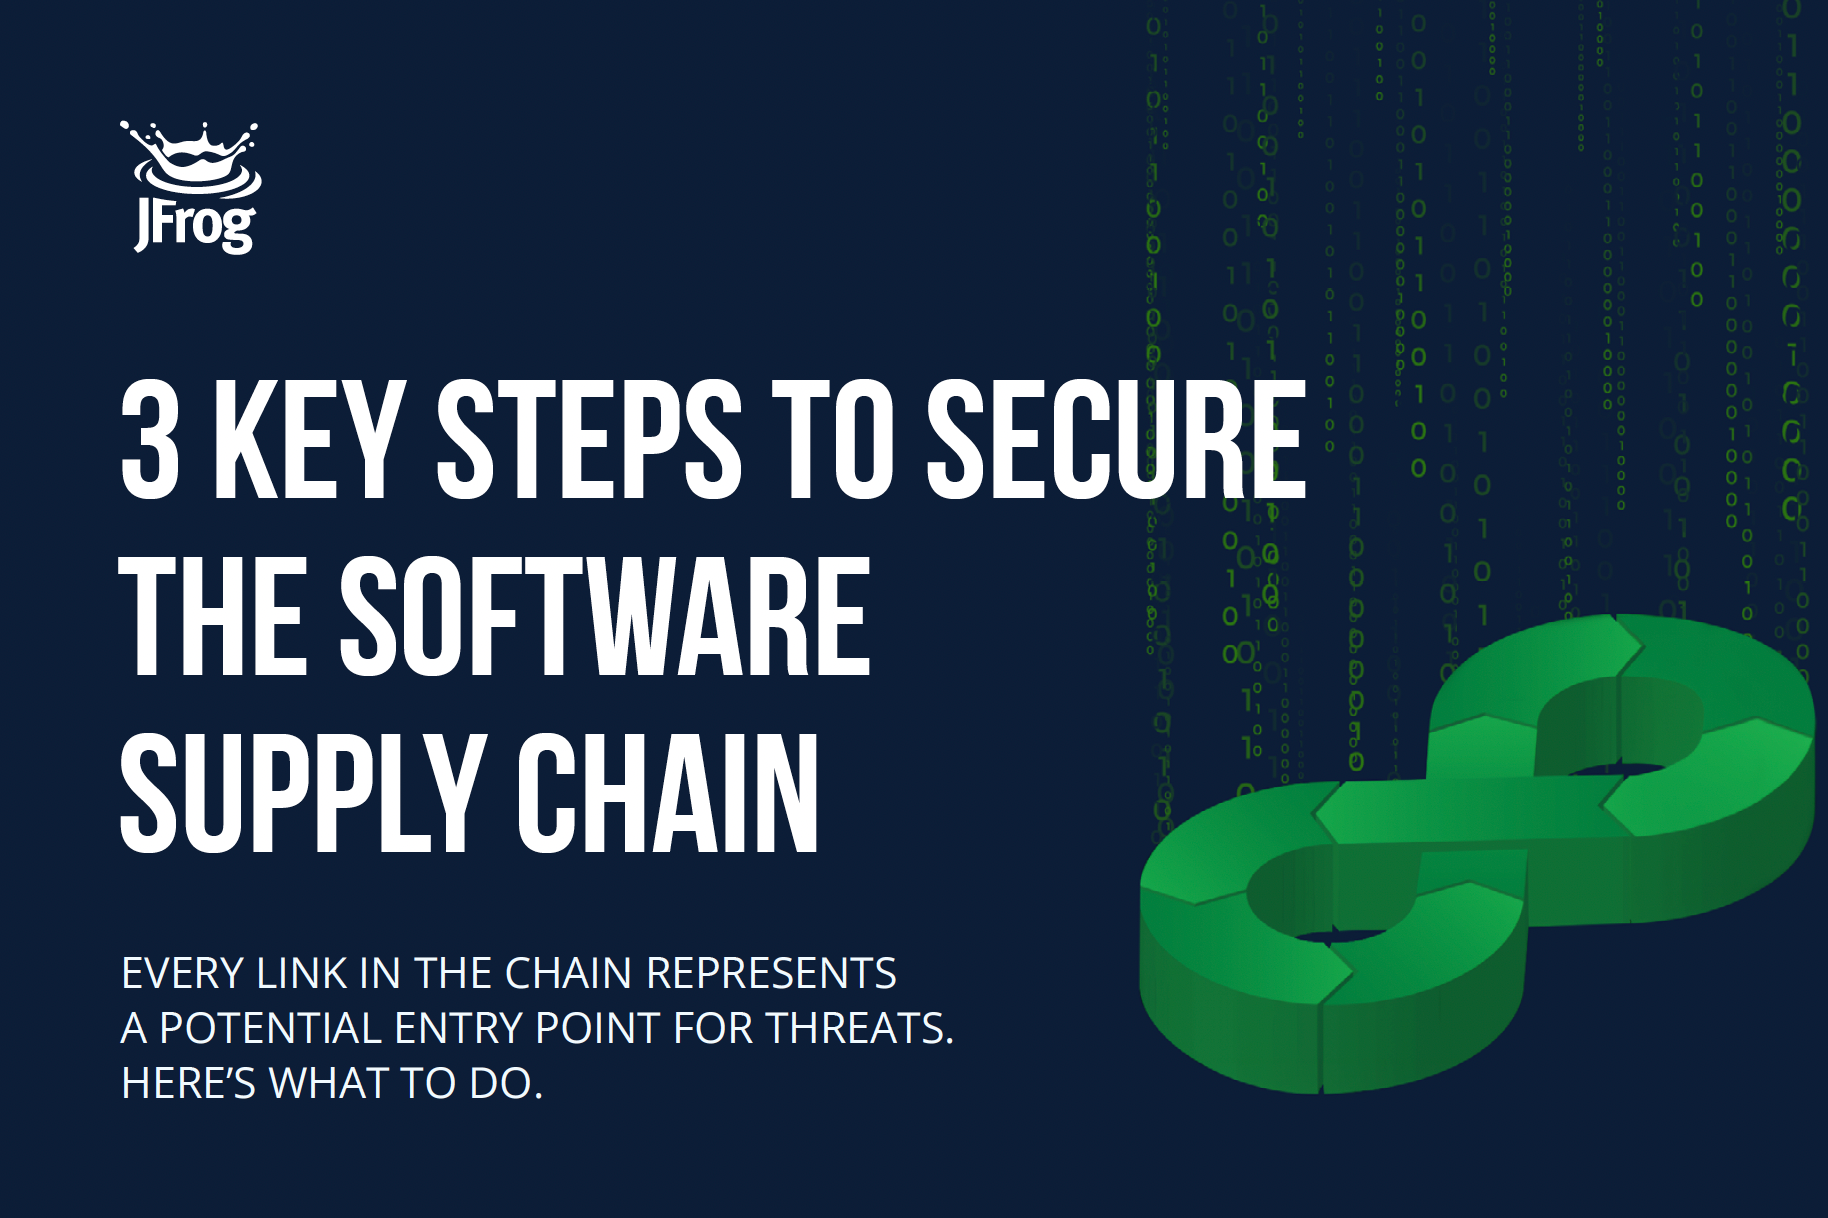 3 steps to secure the software supply chain